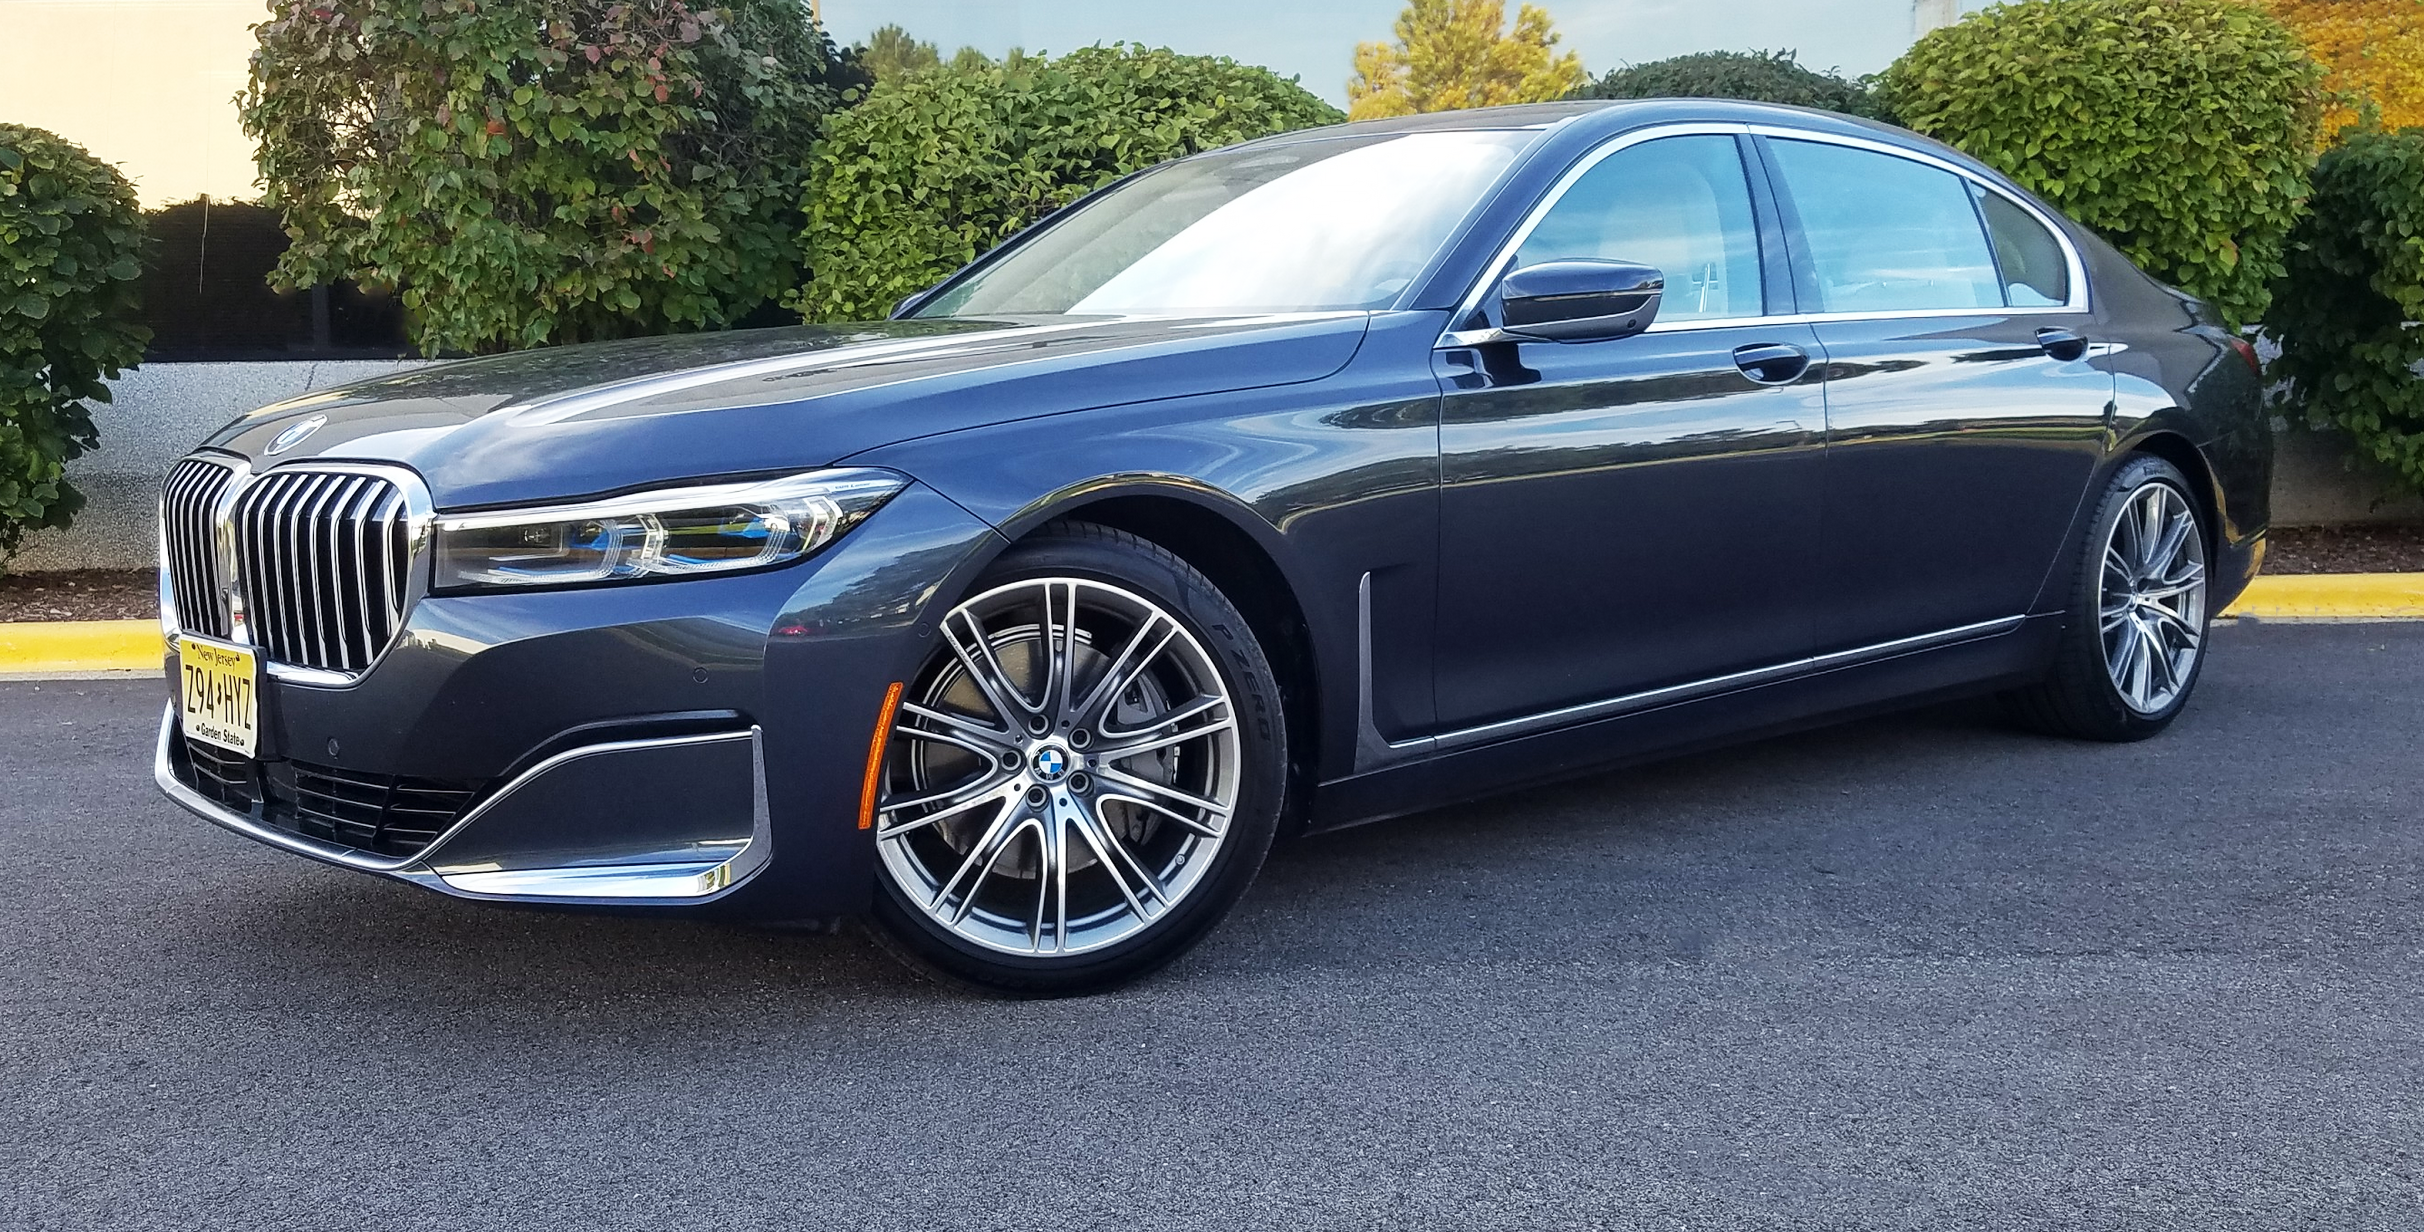 Test Drive: 2020 BMW 740i xDrive | The Daily Drive | Consumer Guide